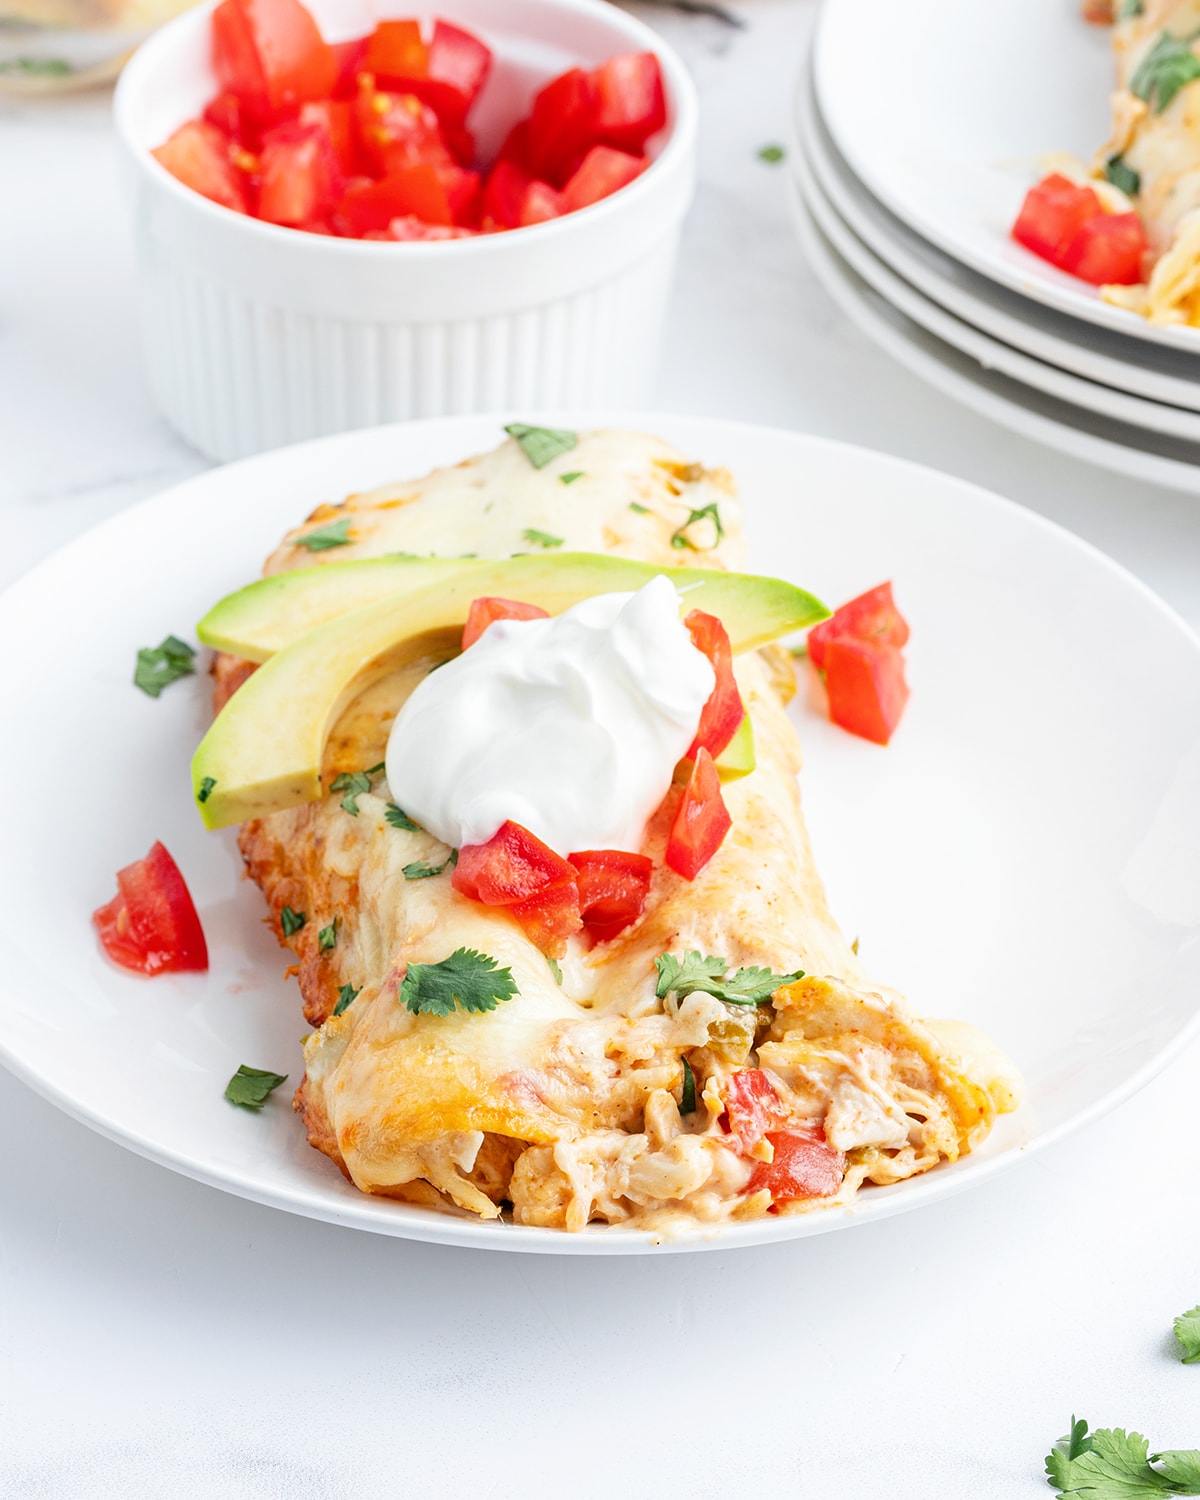 A plate of creamy chicken enchiladas topped with slices of avocado and sour cream.